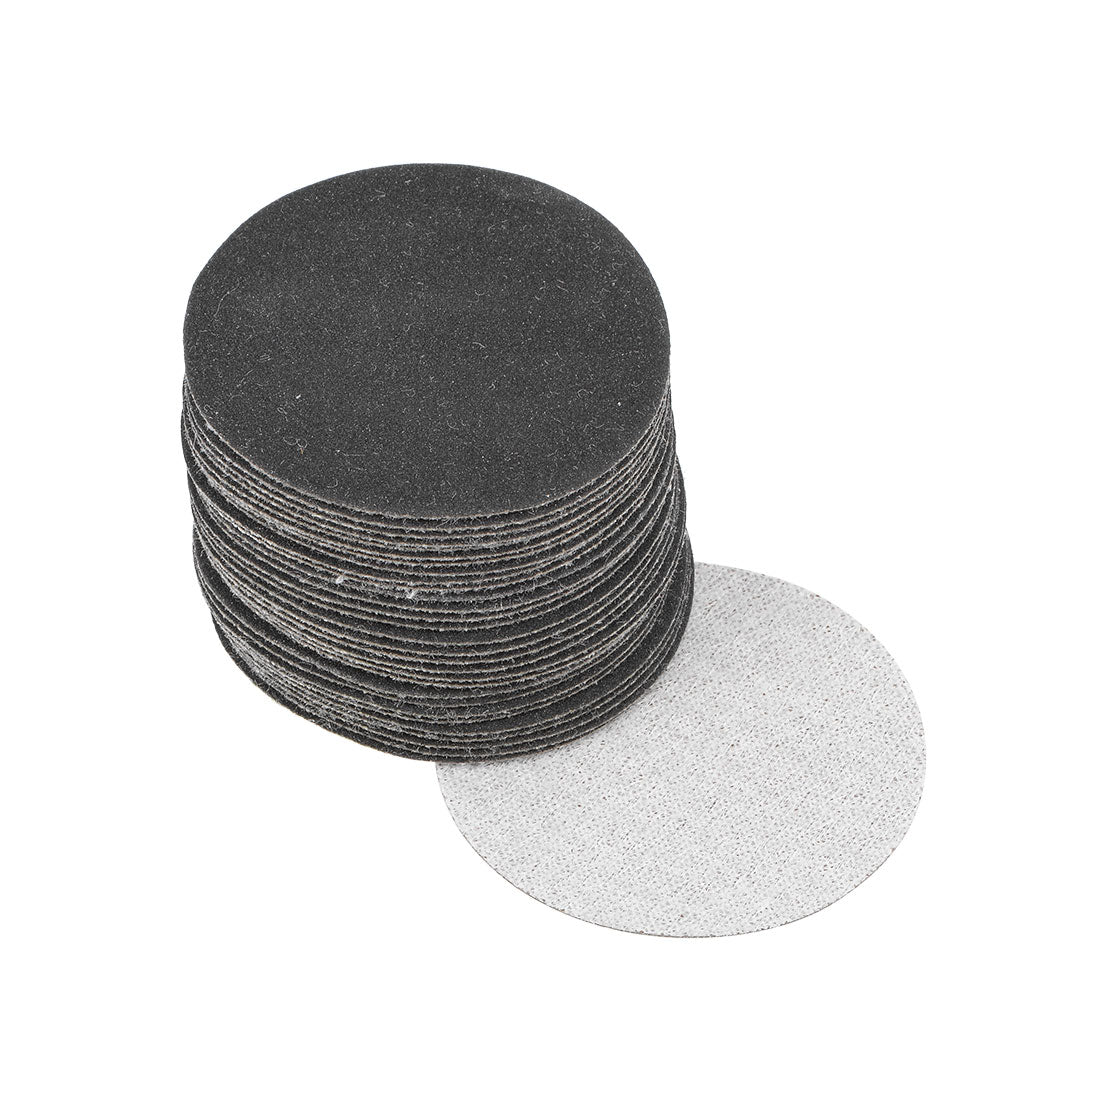 Uxcell Uxcell 2 inch Wet Dry Disc 240 Grit Hook and Loop Sanding Disc Silicon Carbide 30pcs